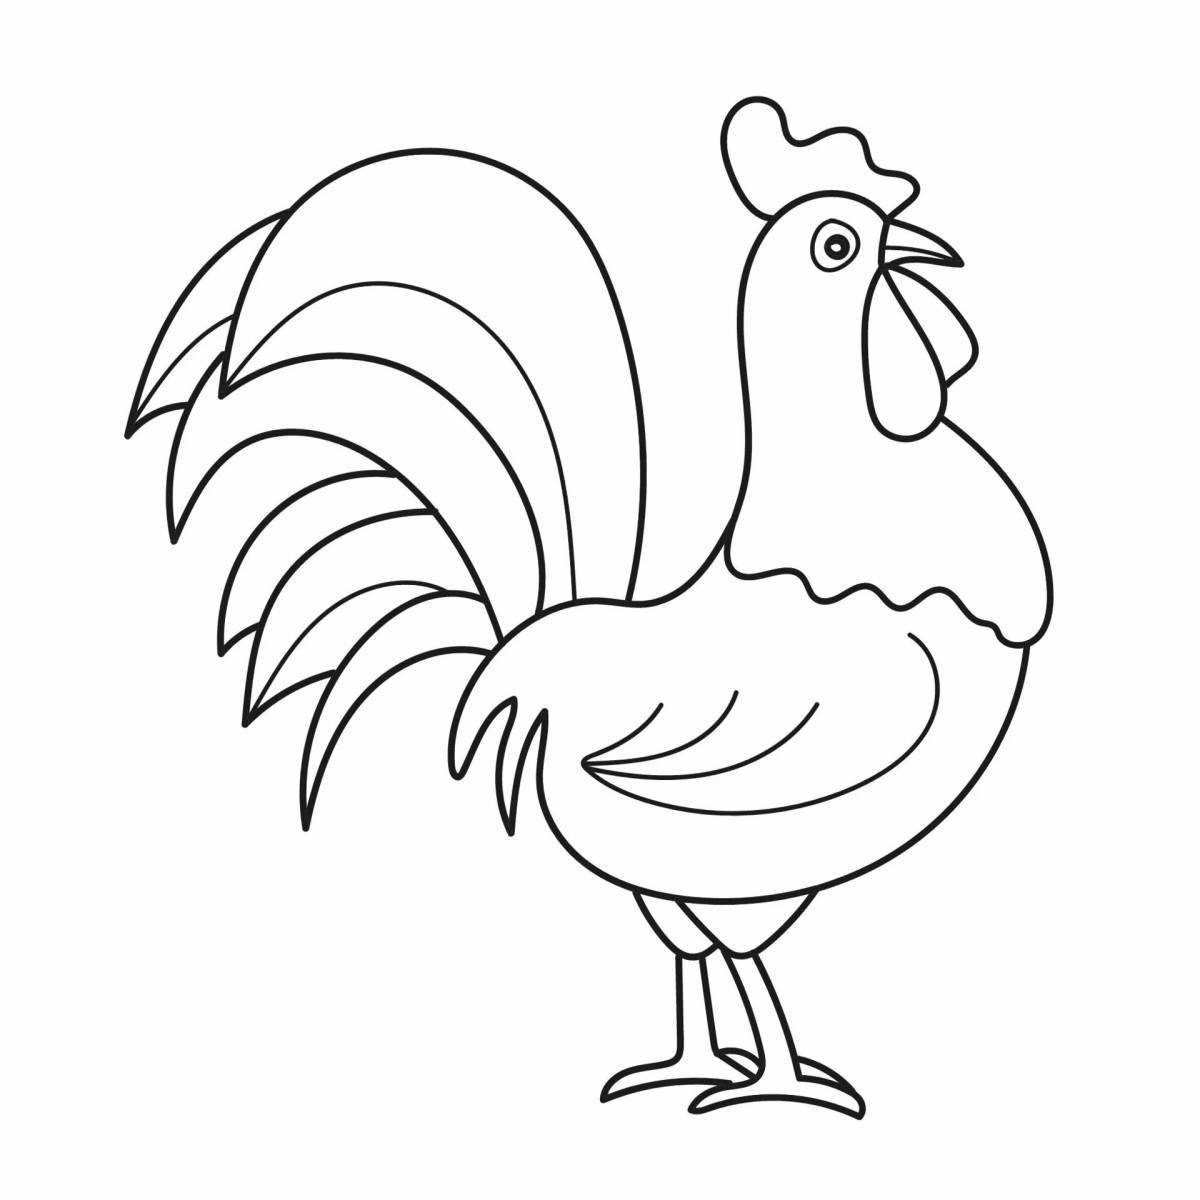 Rooster humorous coloring book for kids